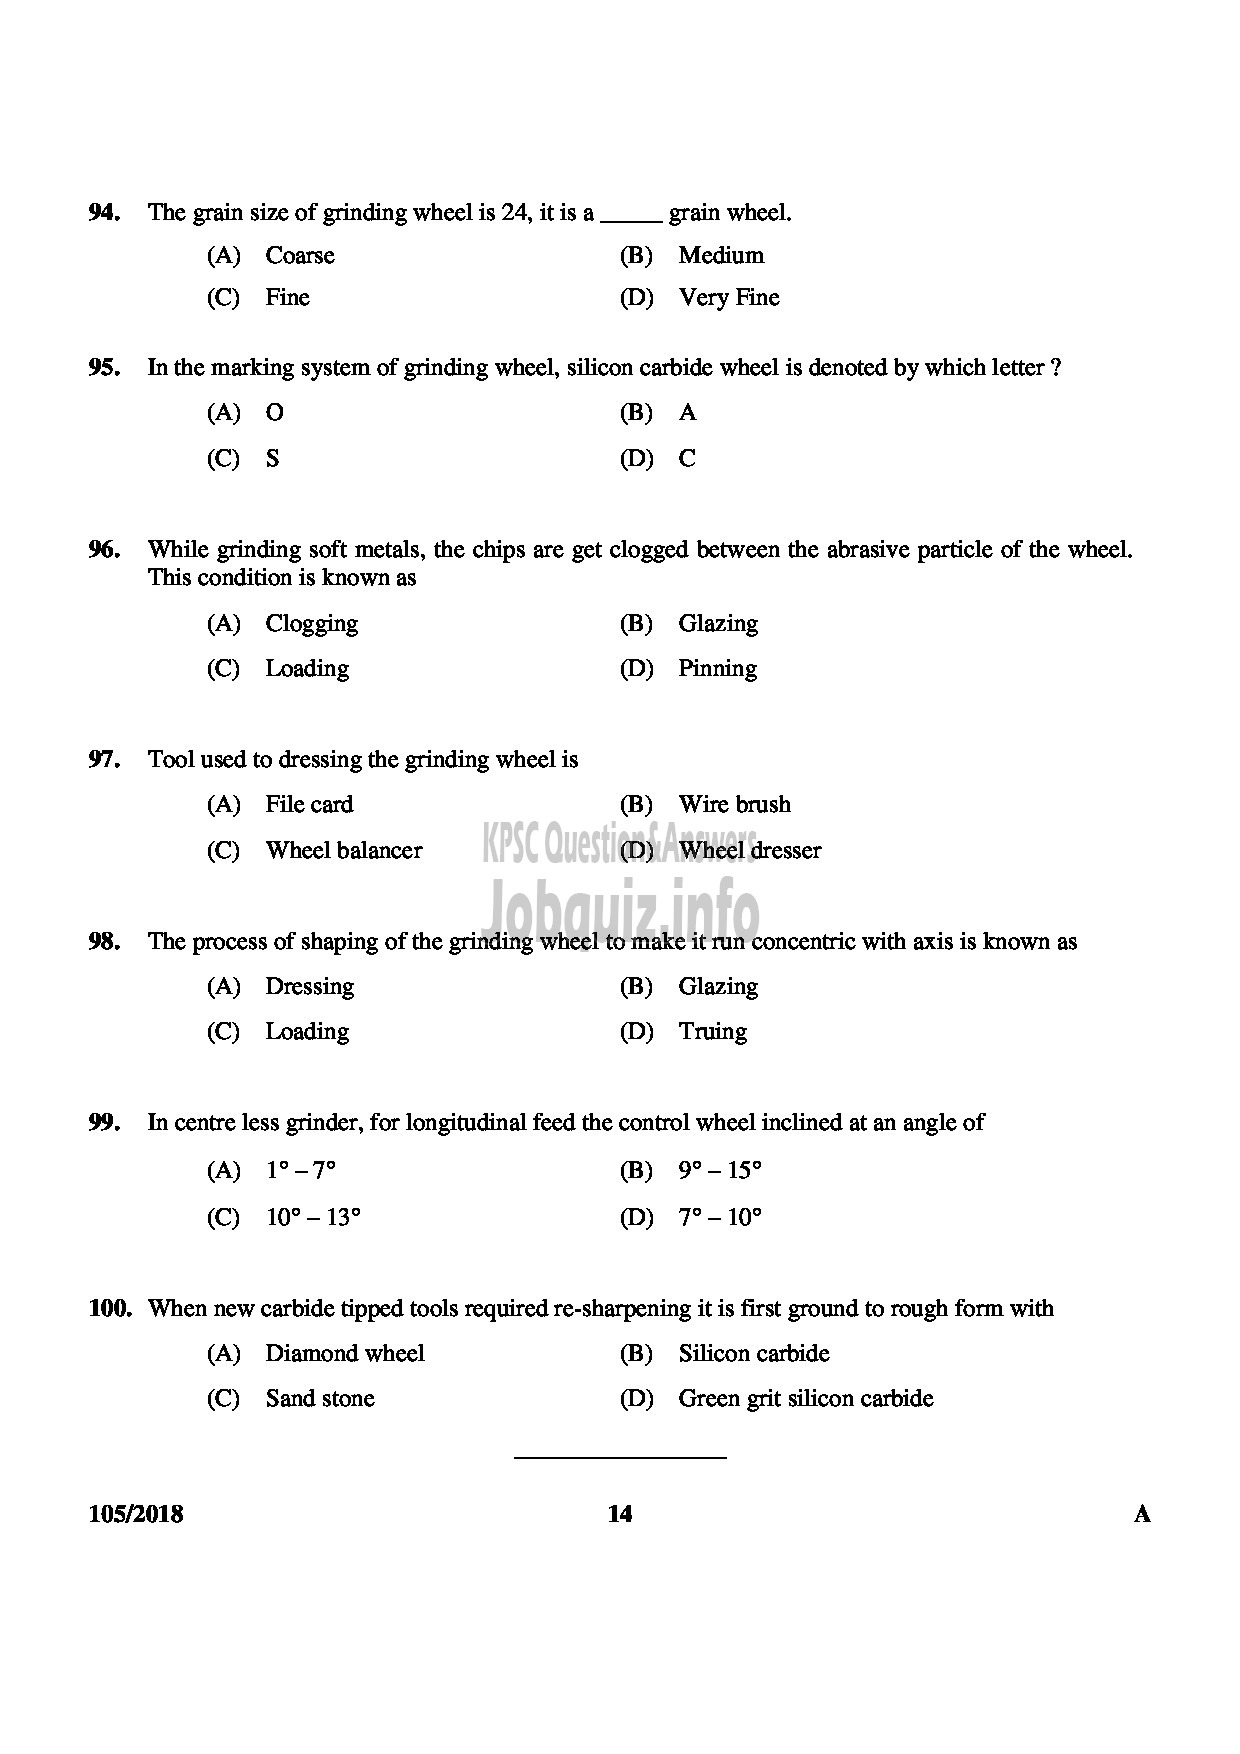 Kerala PSC Question Paper - JUNIOR INSTRUCTOR MACHINIST INDUSTRIAL TRAINING English -14